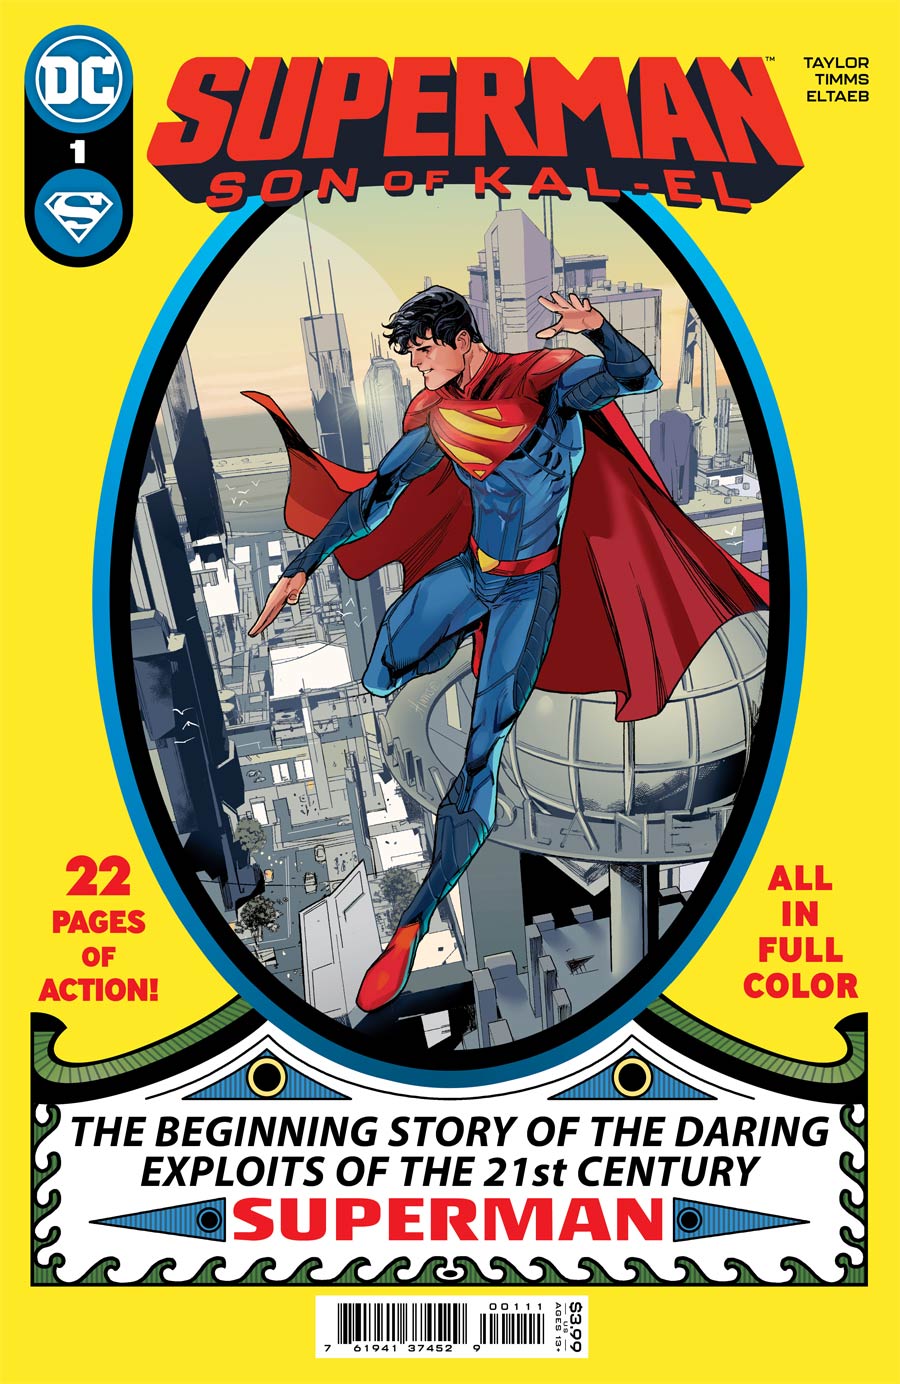 SUPERMAN COMIC BOOK COVER #1 64 Page Action Full Color Metal Tin Sign Magnet USA 